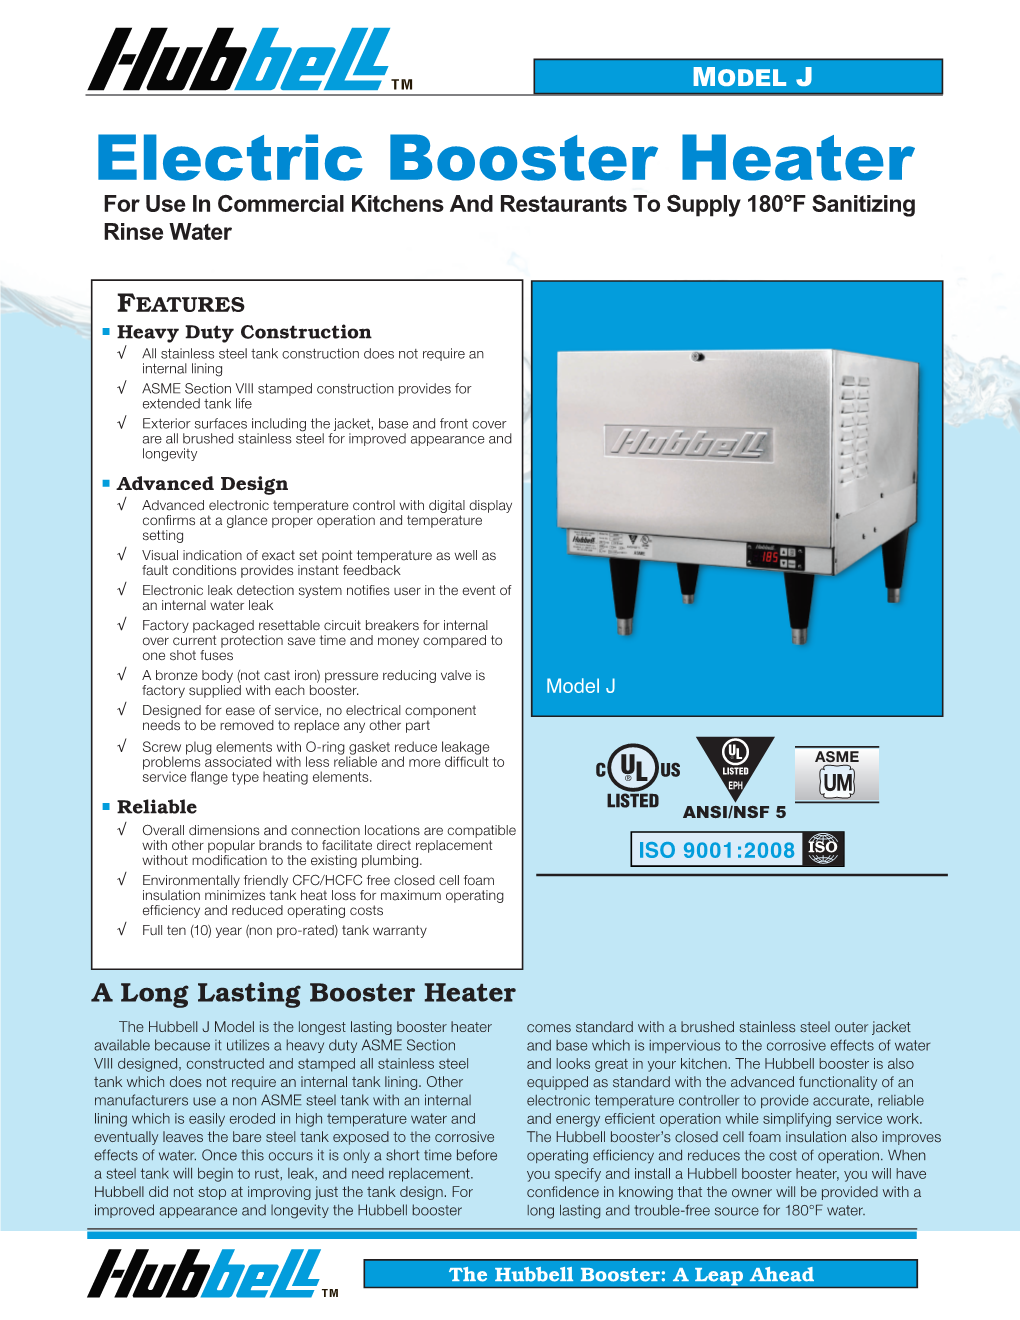 Electric Booster Heater for Use in Commercial Kitchens and Restaurants to Supply 180°F Sanitizing Rinse Water